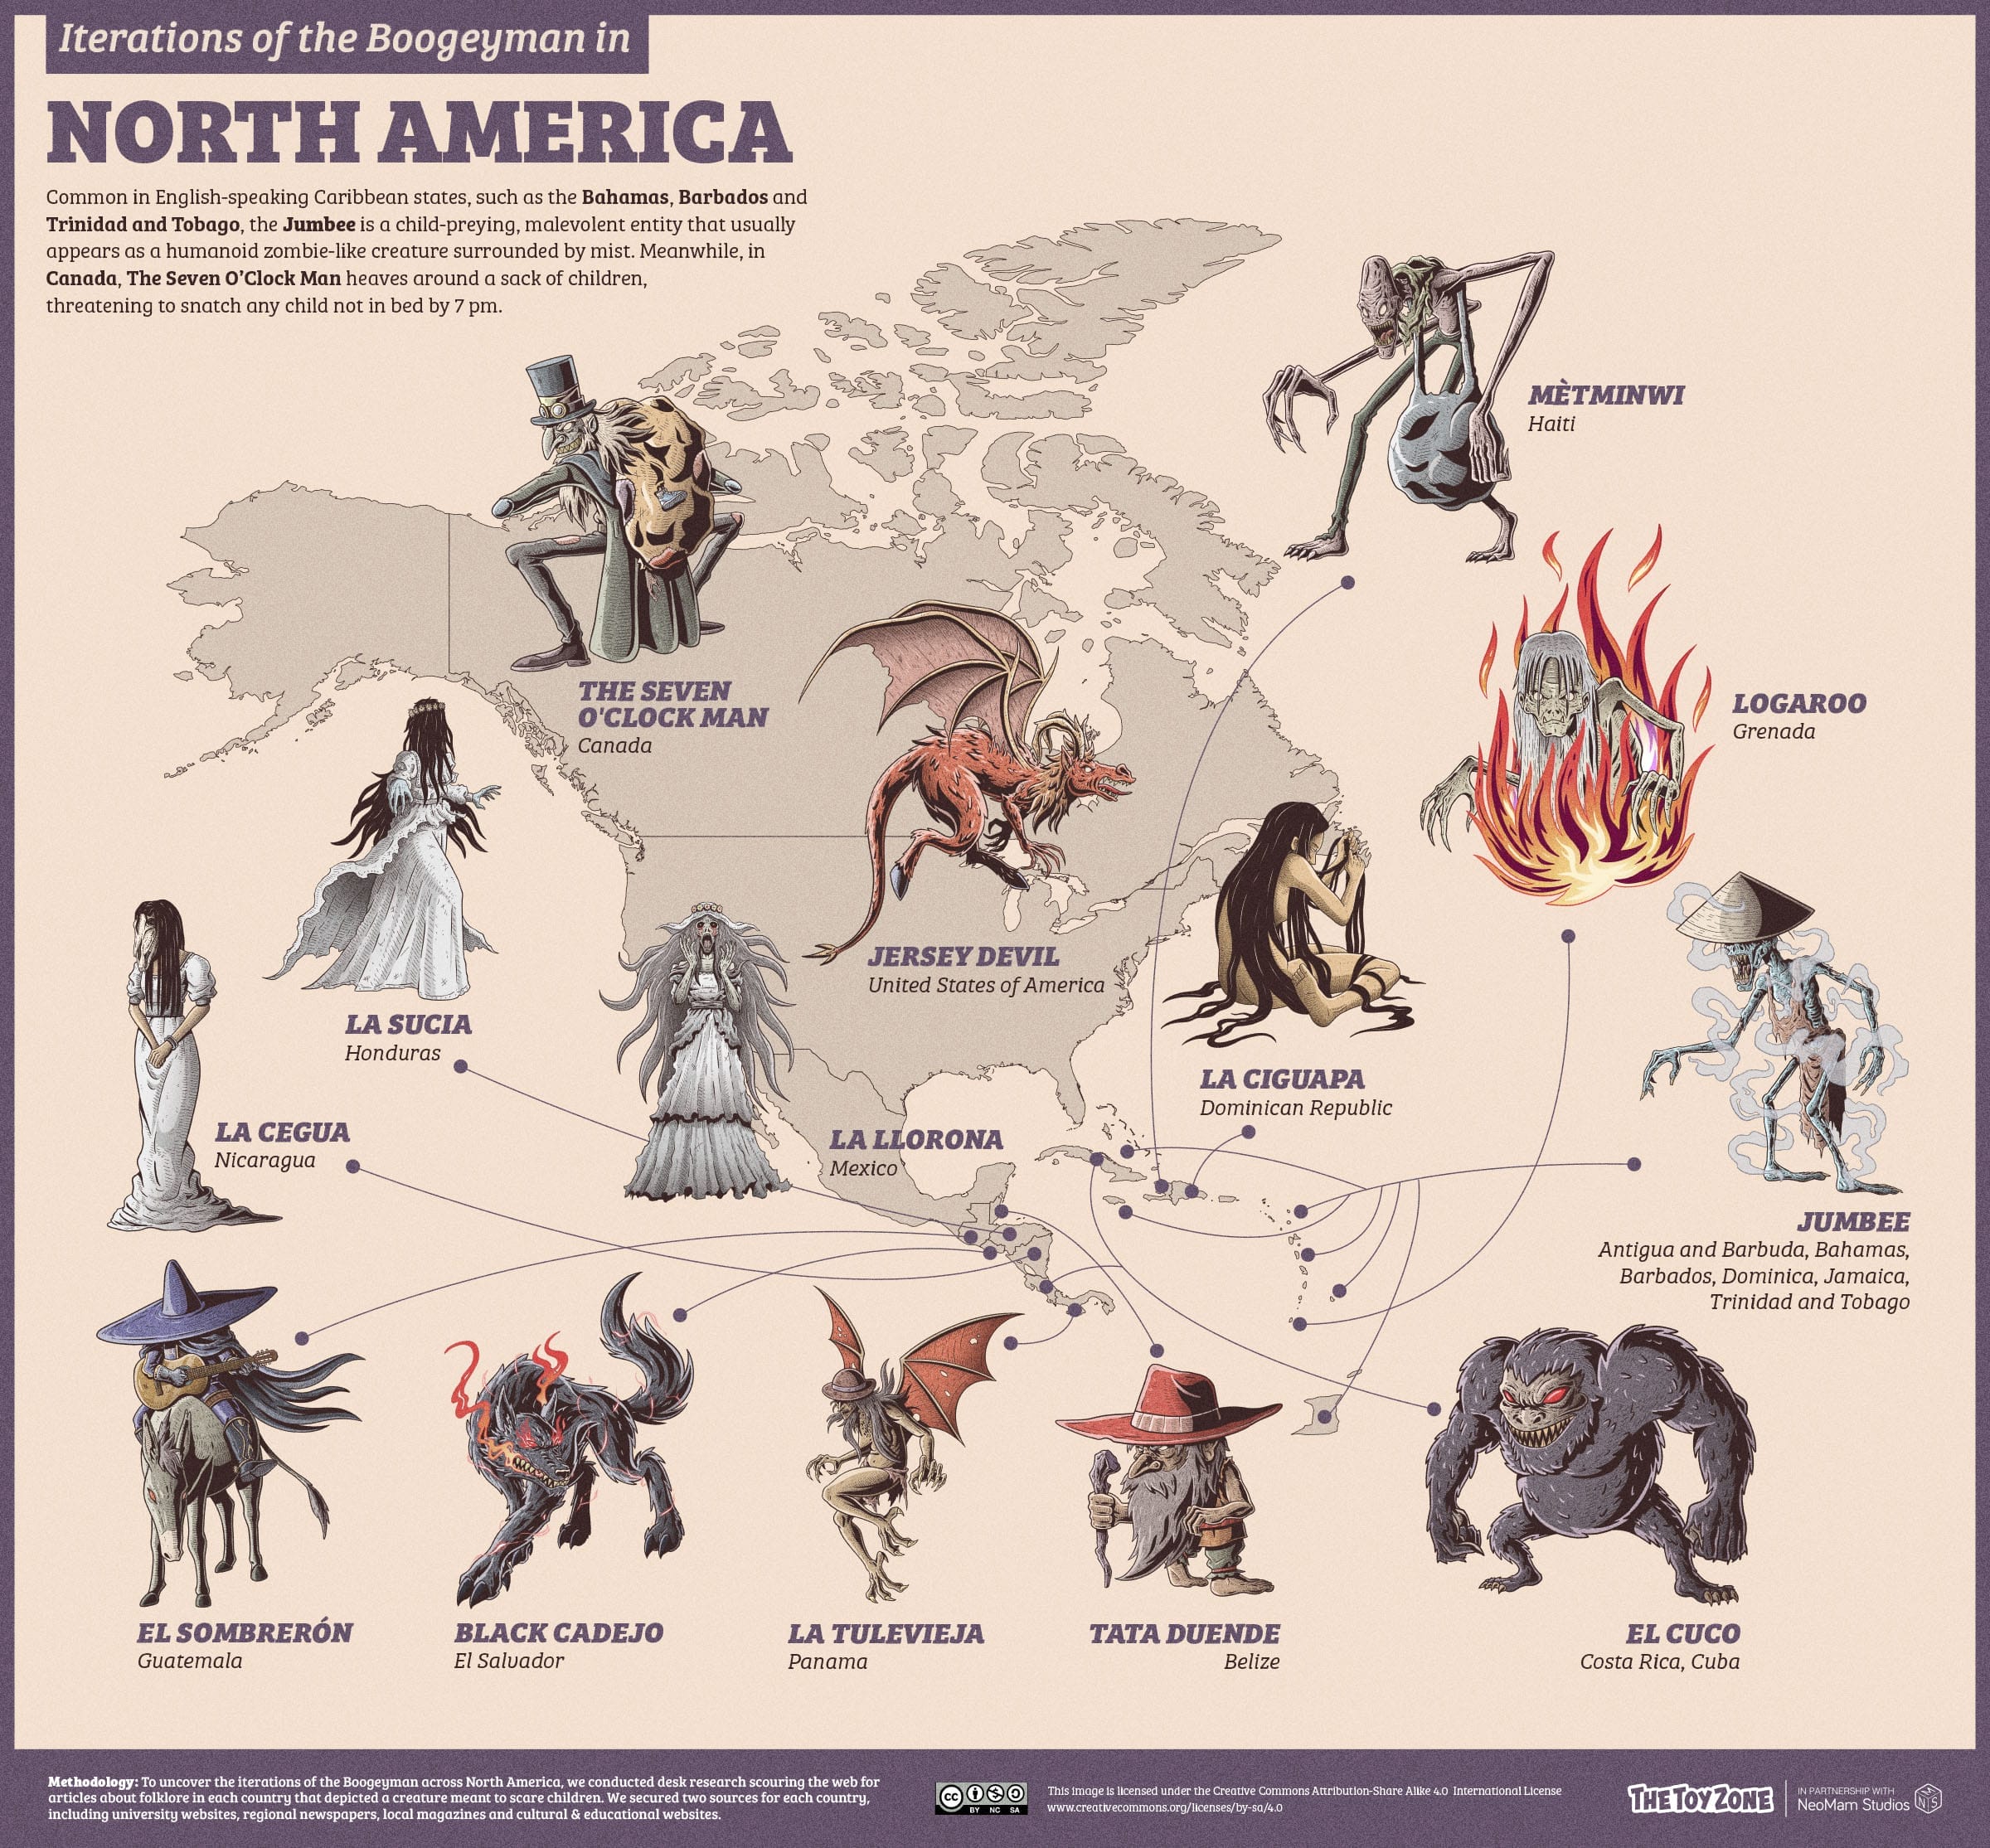 Folklore representations of the boogeyman in North America